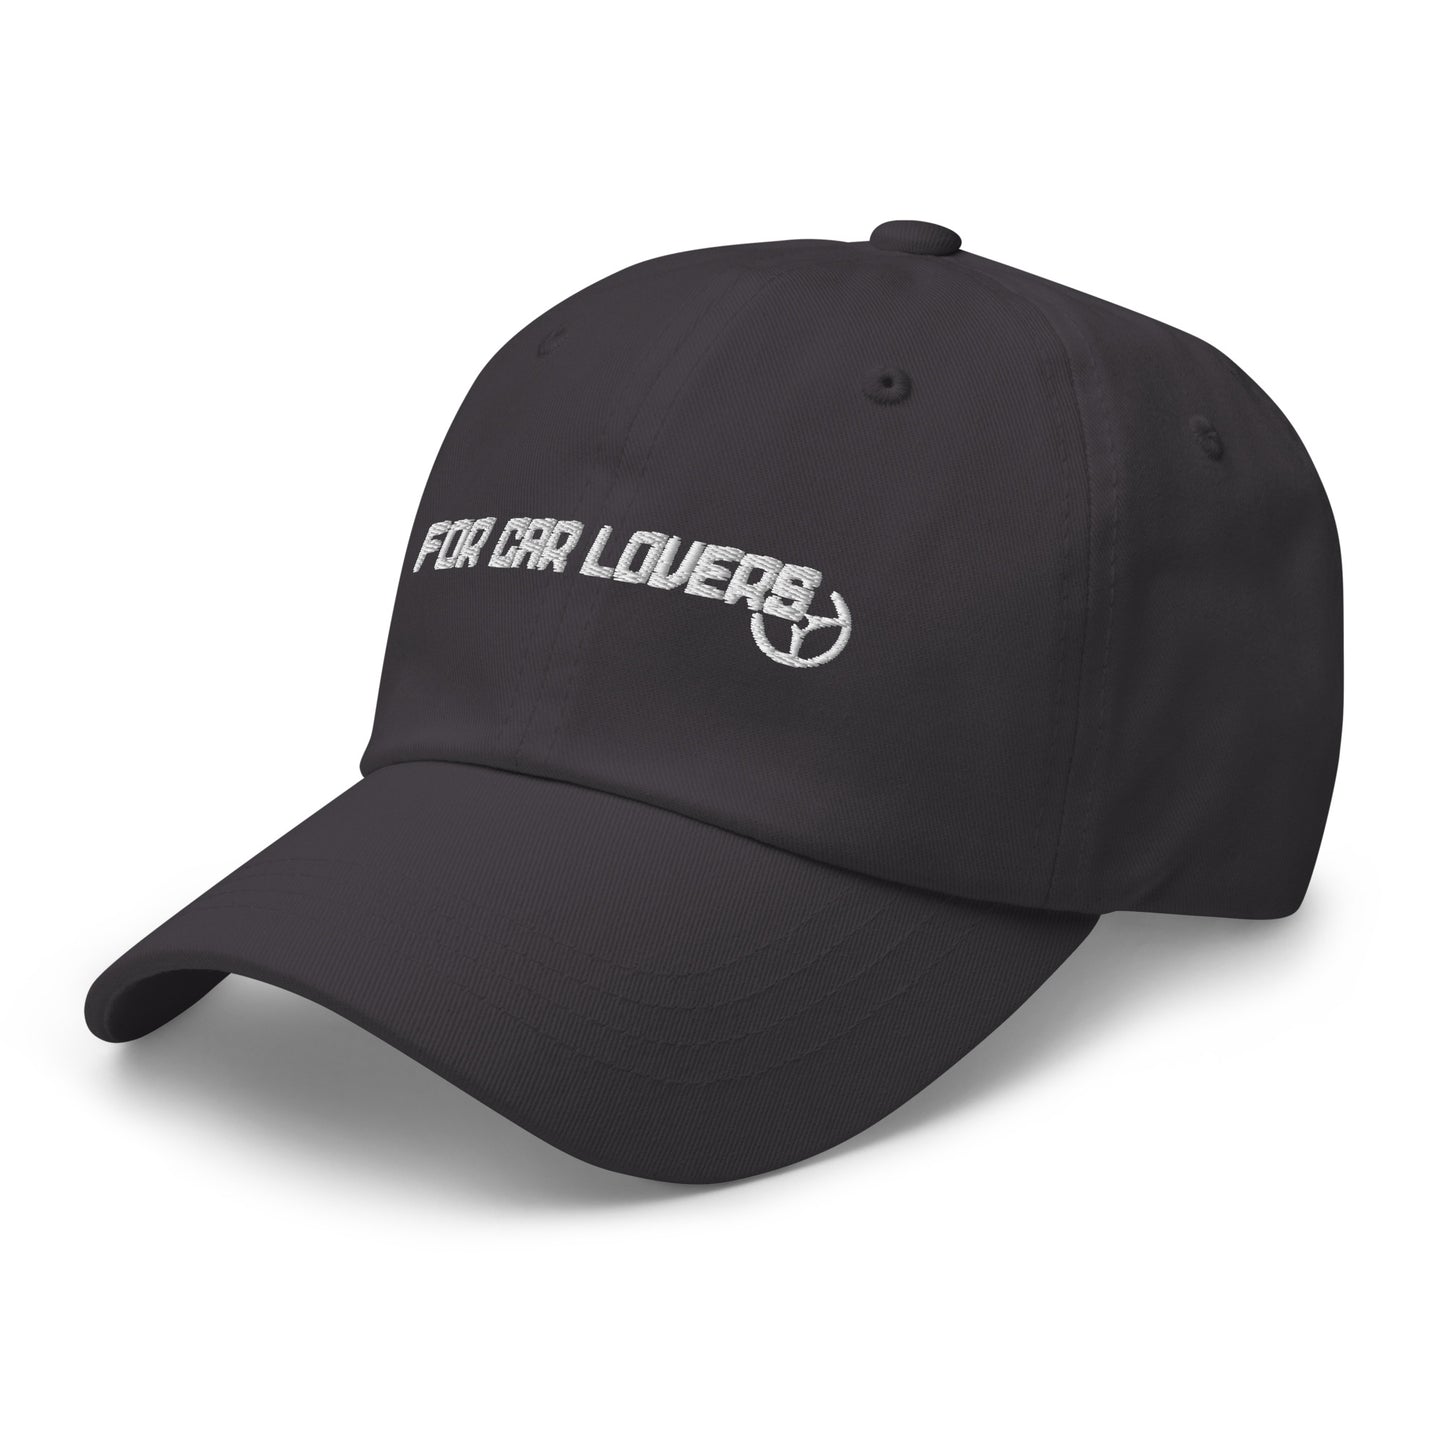 Embroidered unisex cap "For Car Lovers"